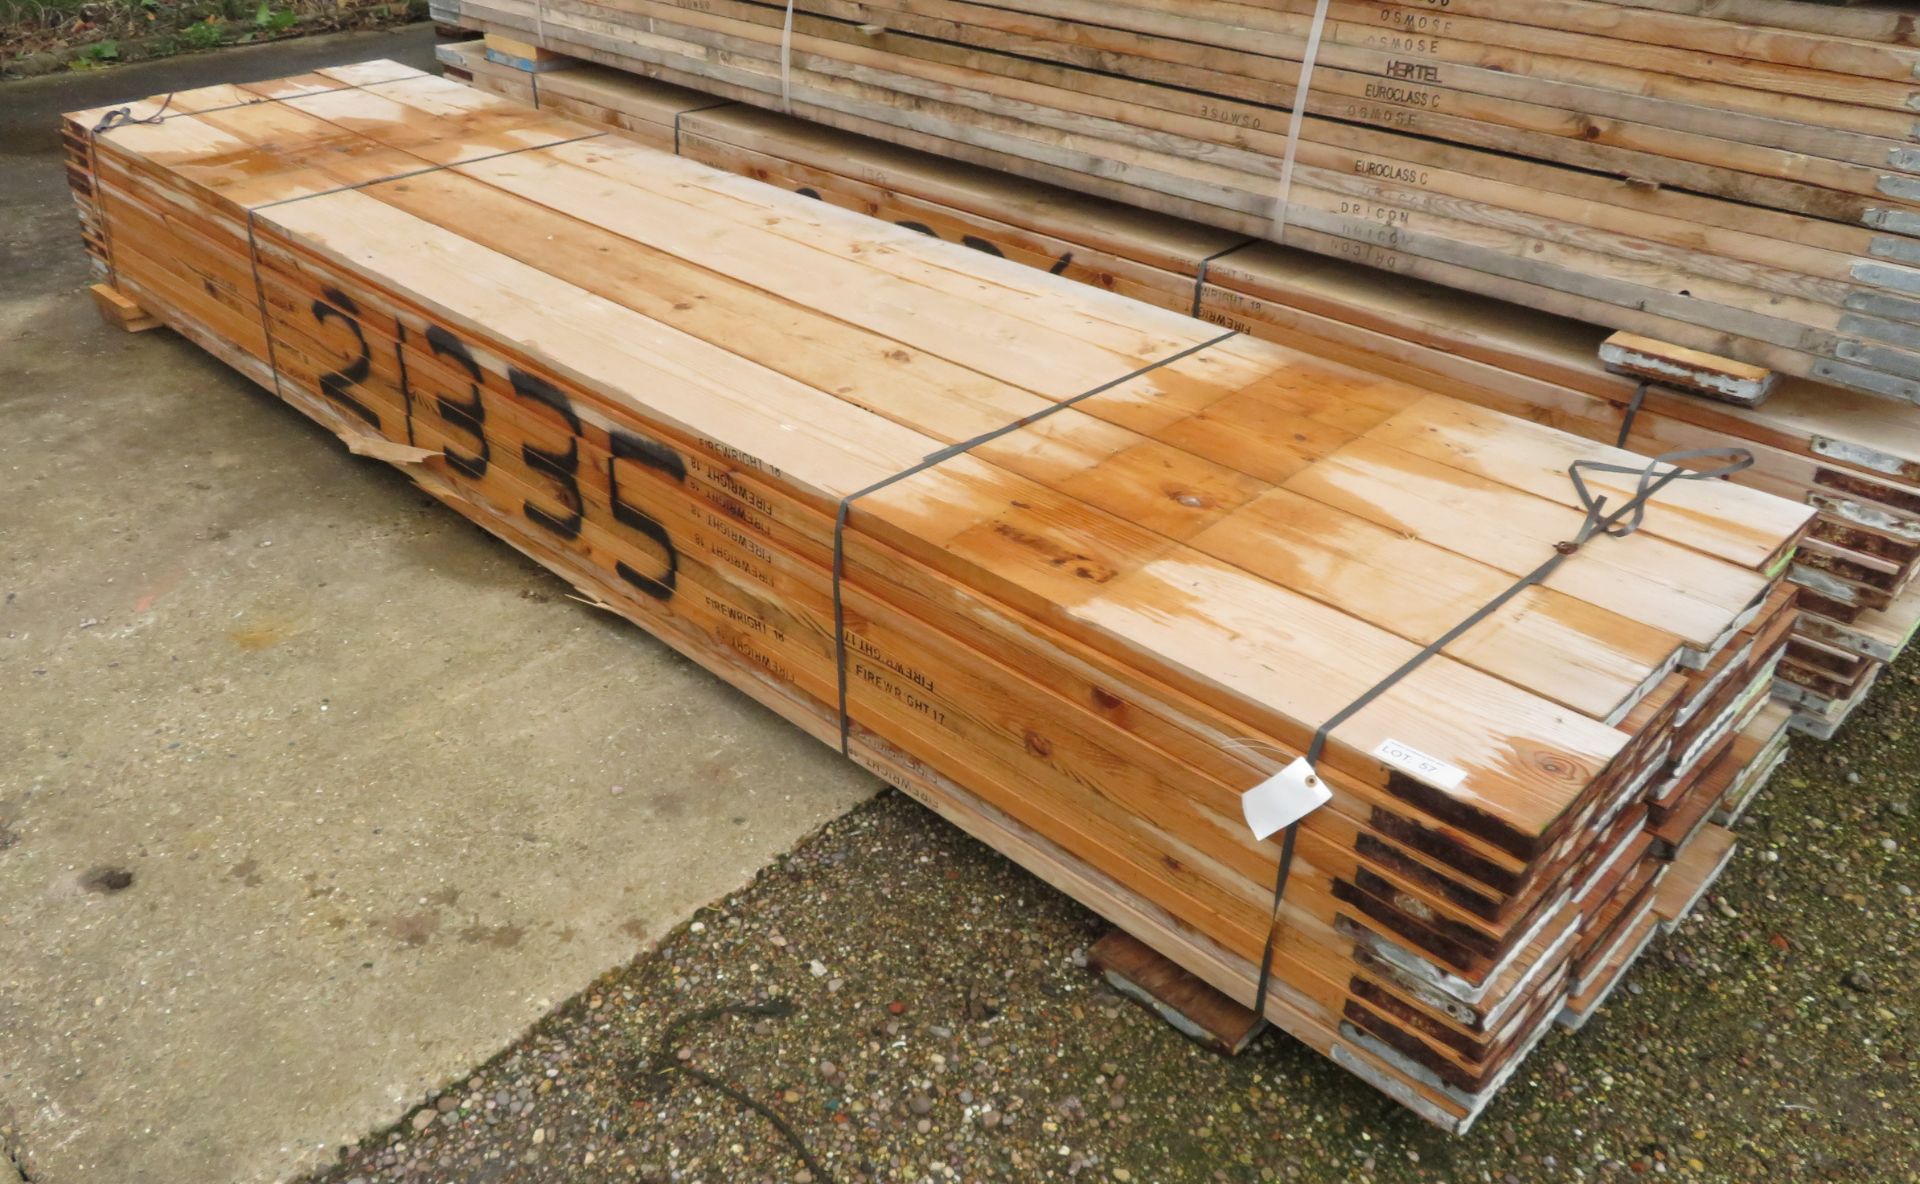 44x 13ft Wooden Scaffolding Board. Please Note There Is A £10 Loading Charge On This Lot. - Image 2 of 4